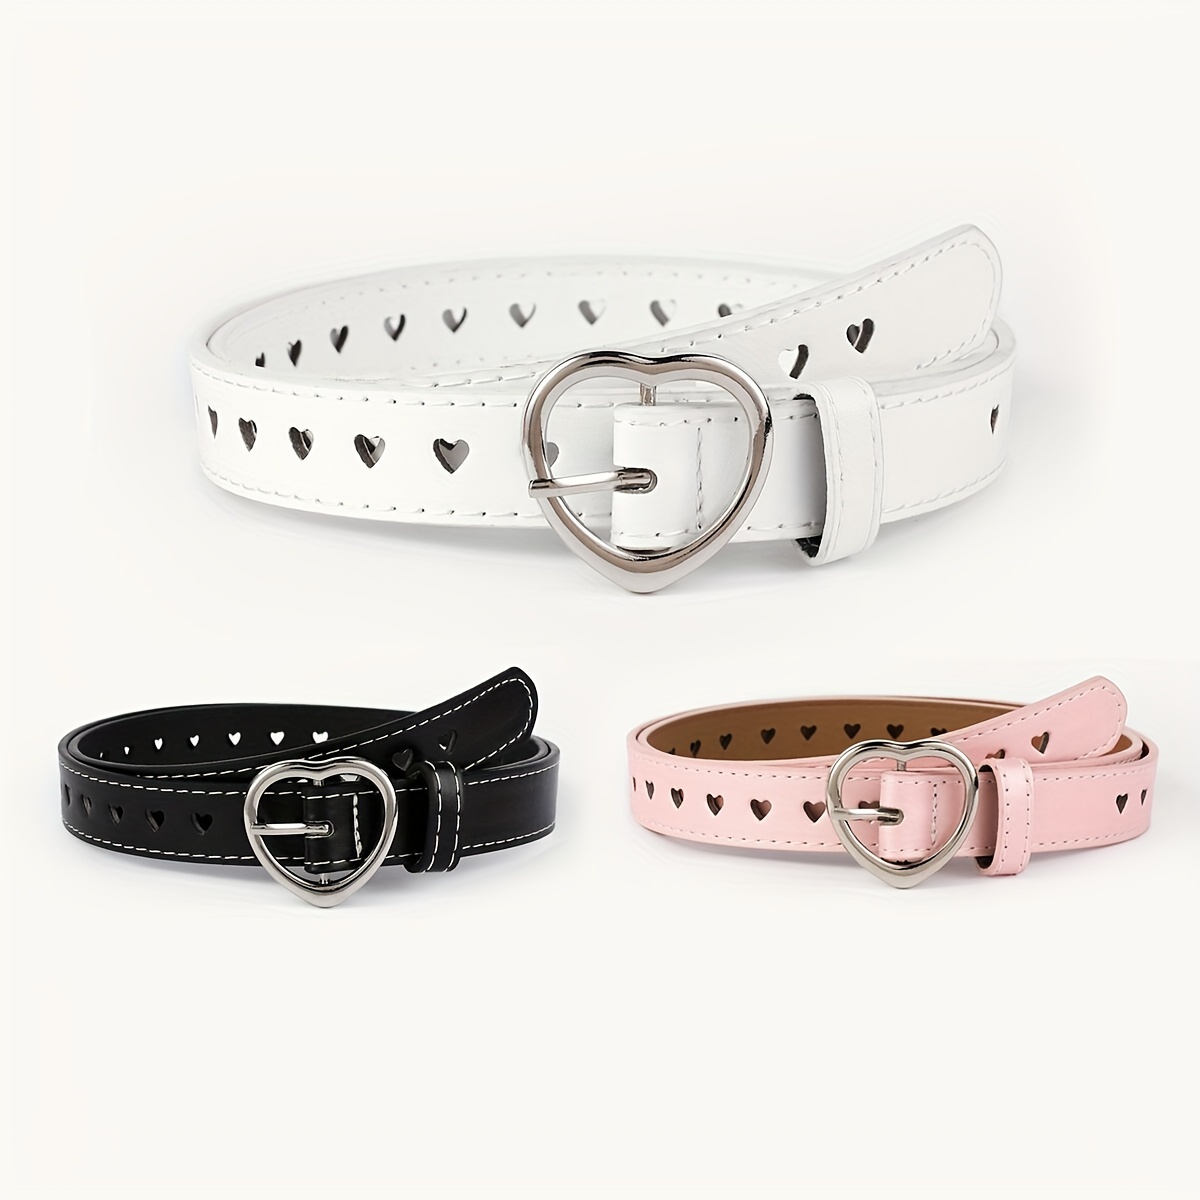 

Trendy Heart Buckle Belts Black Cute Eyelet Pu Leather Belt For Women Casual Jeans Pants Waistband Valentine's Day Gift